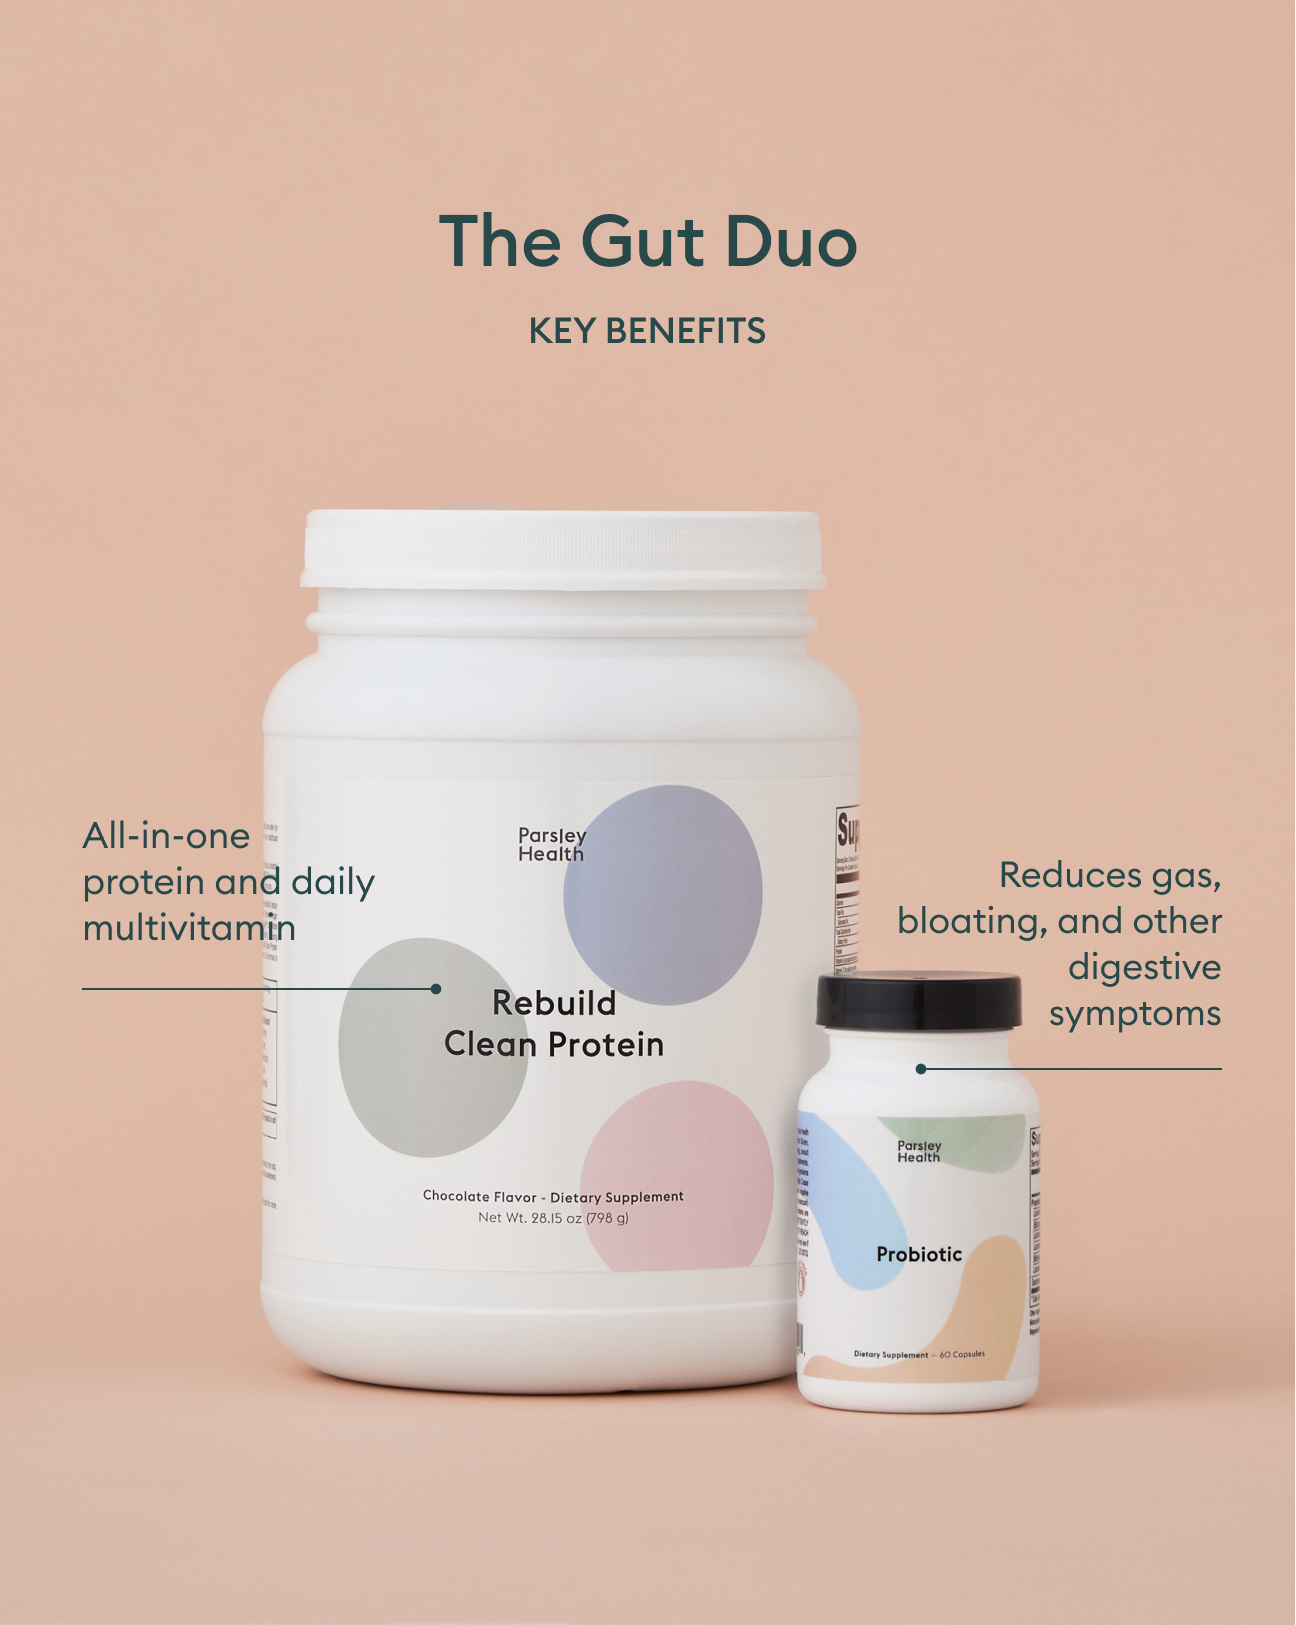 The Gut Duo